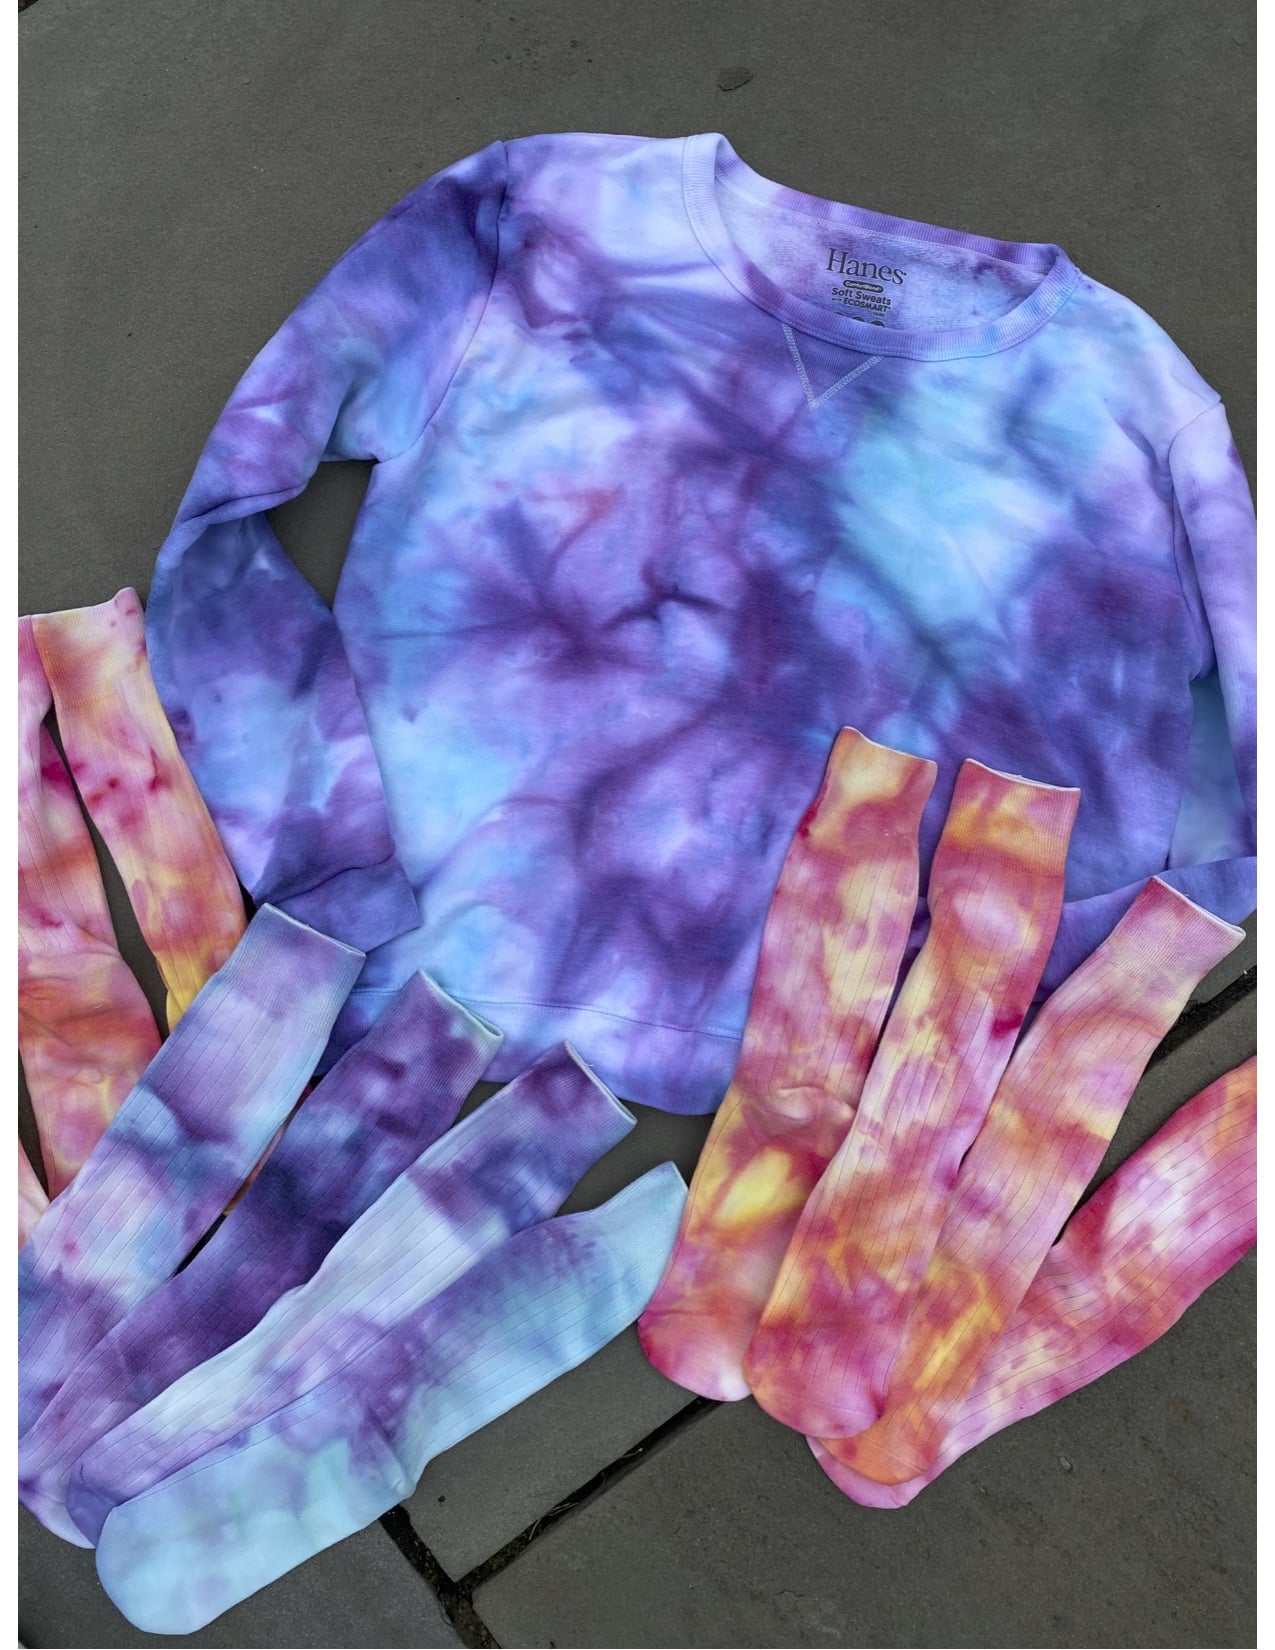 How to Tie-Dye a Sweatshirt at Home